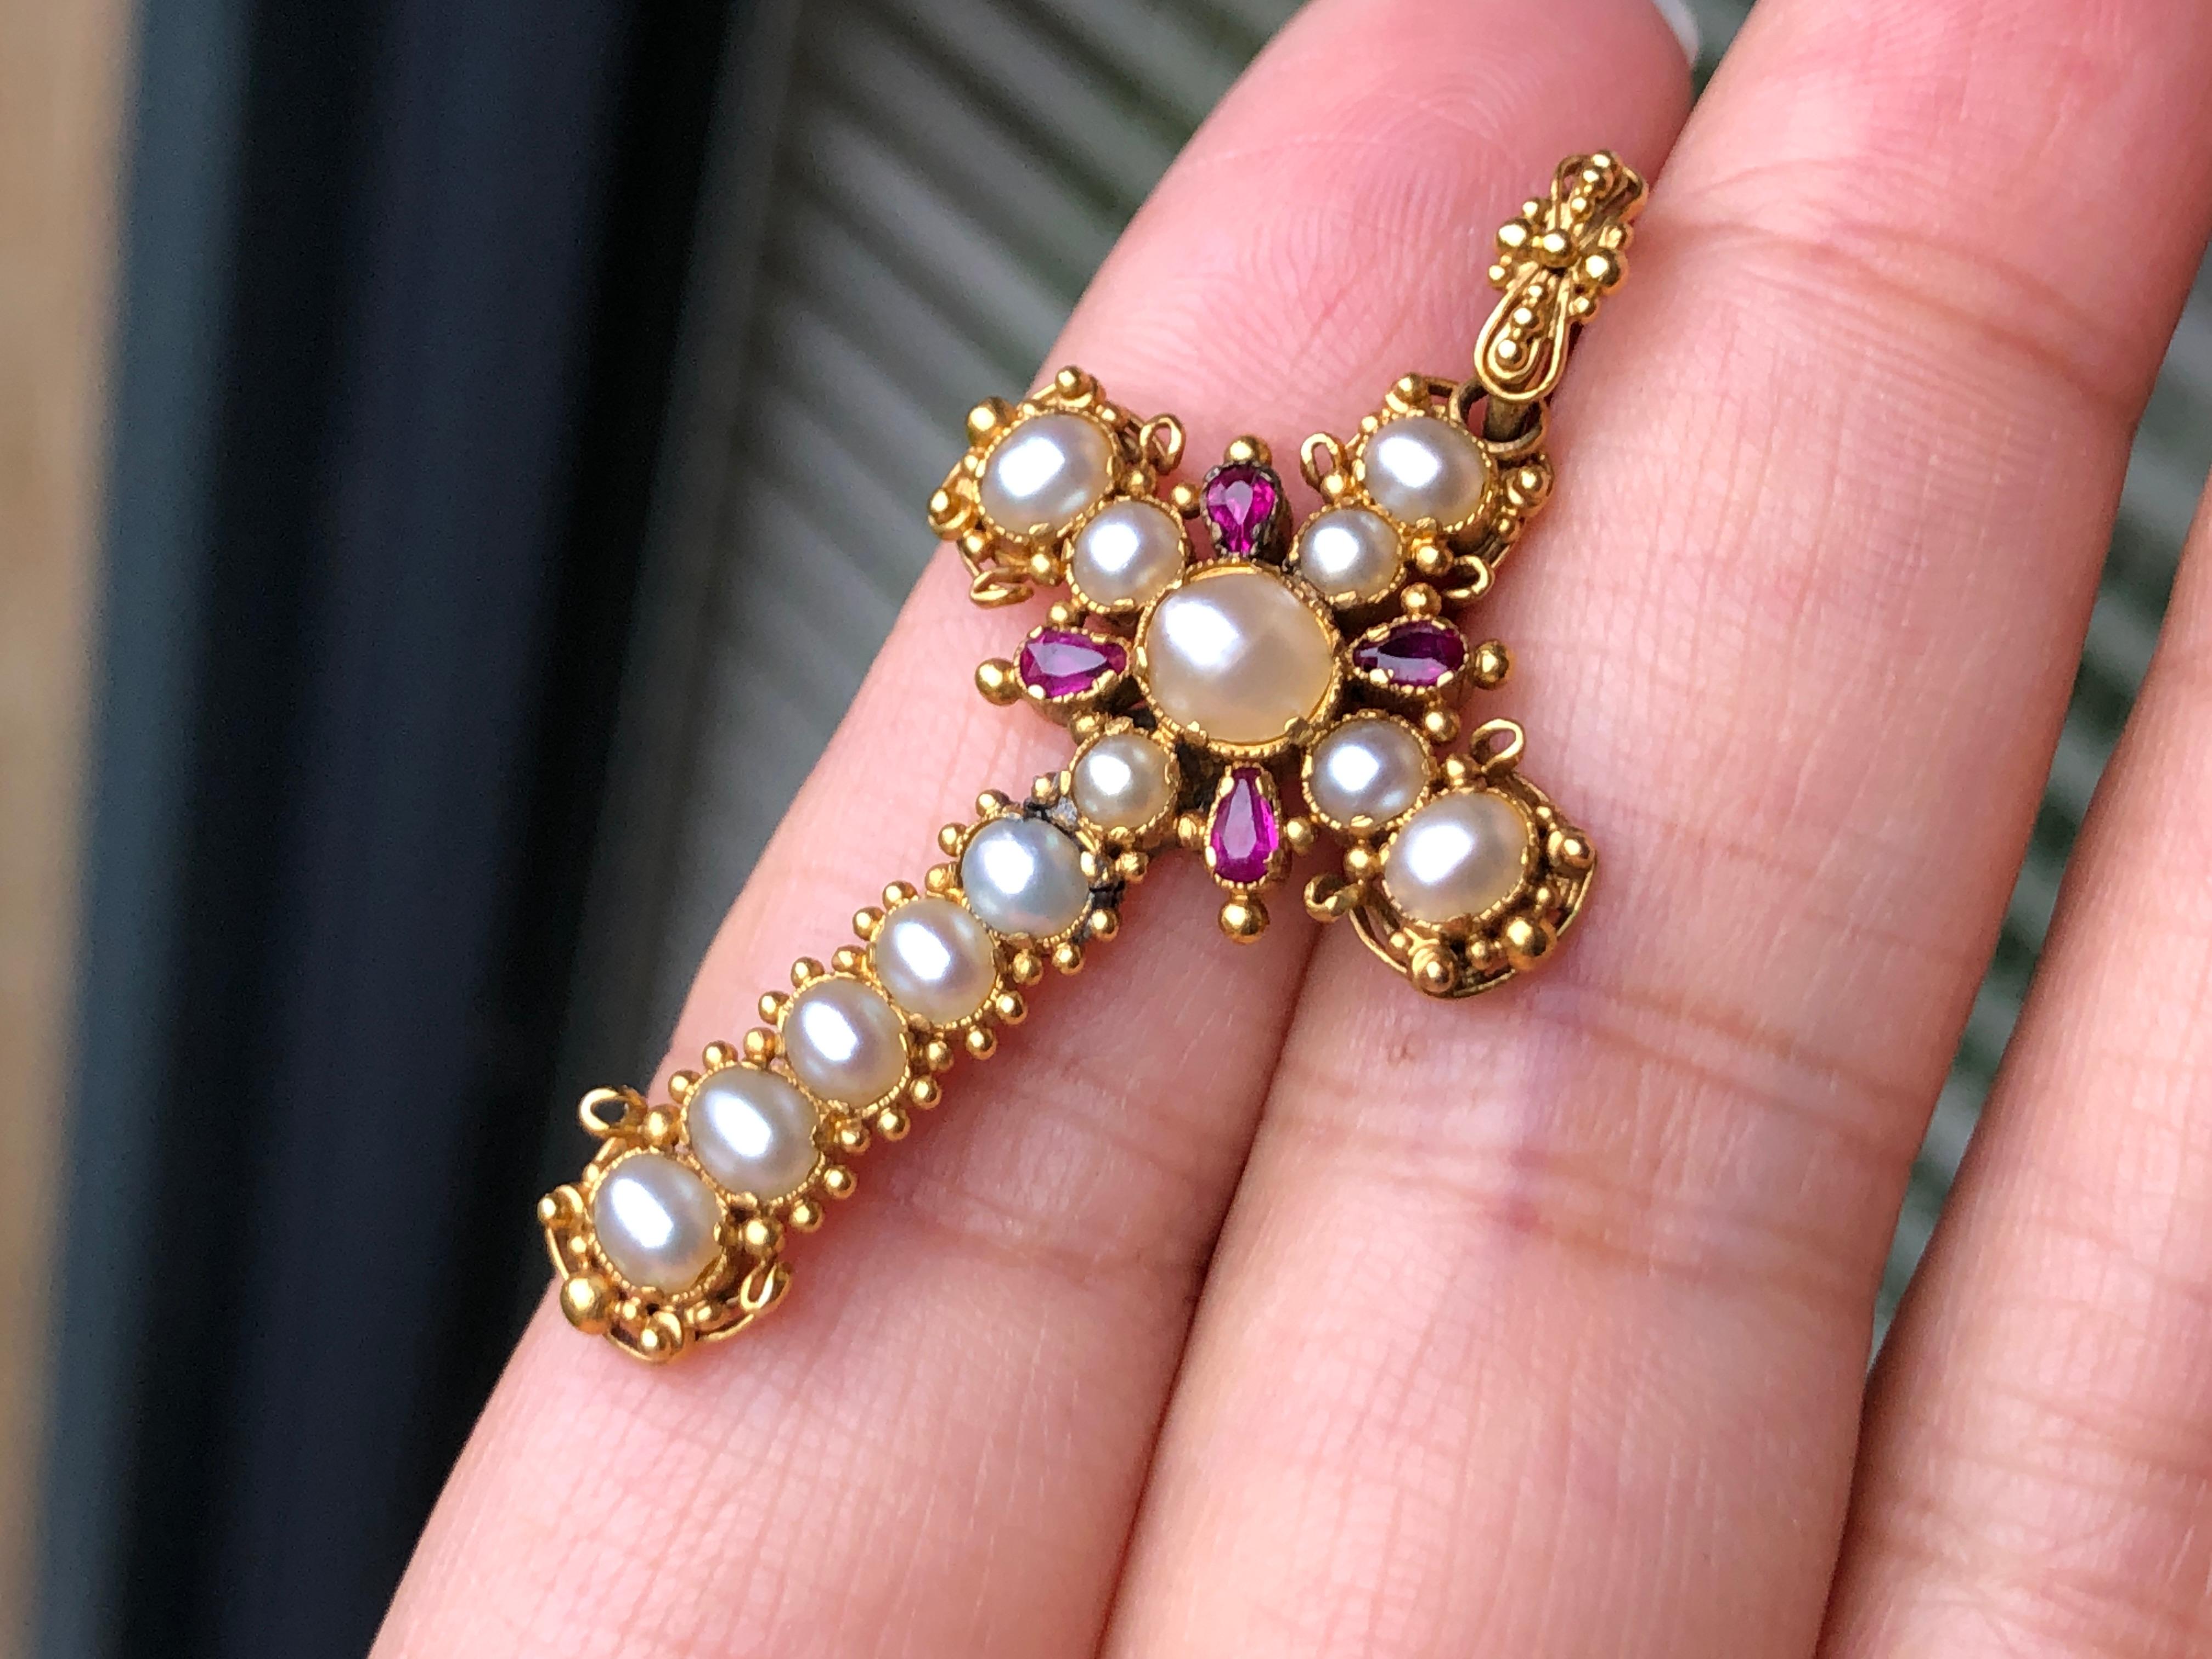 A superb Georgian Italian gold ruby and seed pearl cross pendant, set with graduated creamy natural pearls in beaded and four pears cut rubies. It would be suitable as a Confirmation present.

DIMENSION
4.2cm x 2.3cm

WEIGHT
4.2g

MARKS
Unmarked,